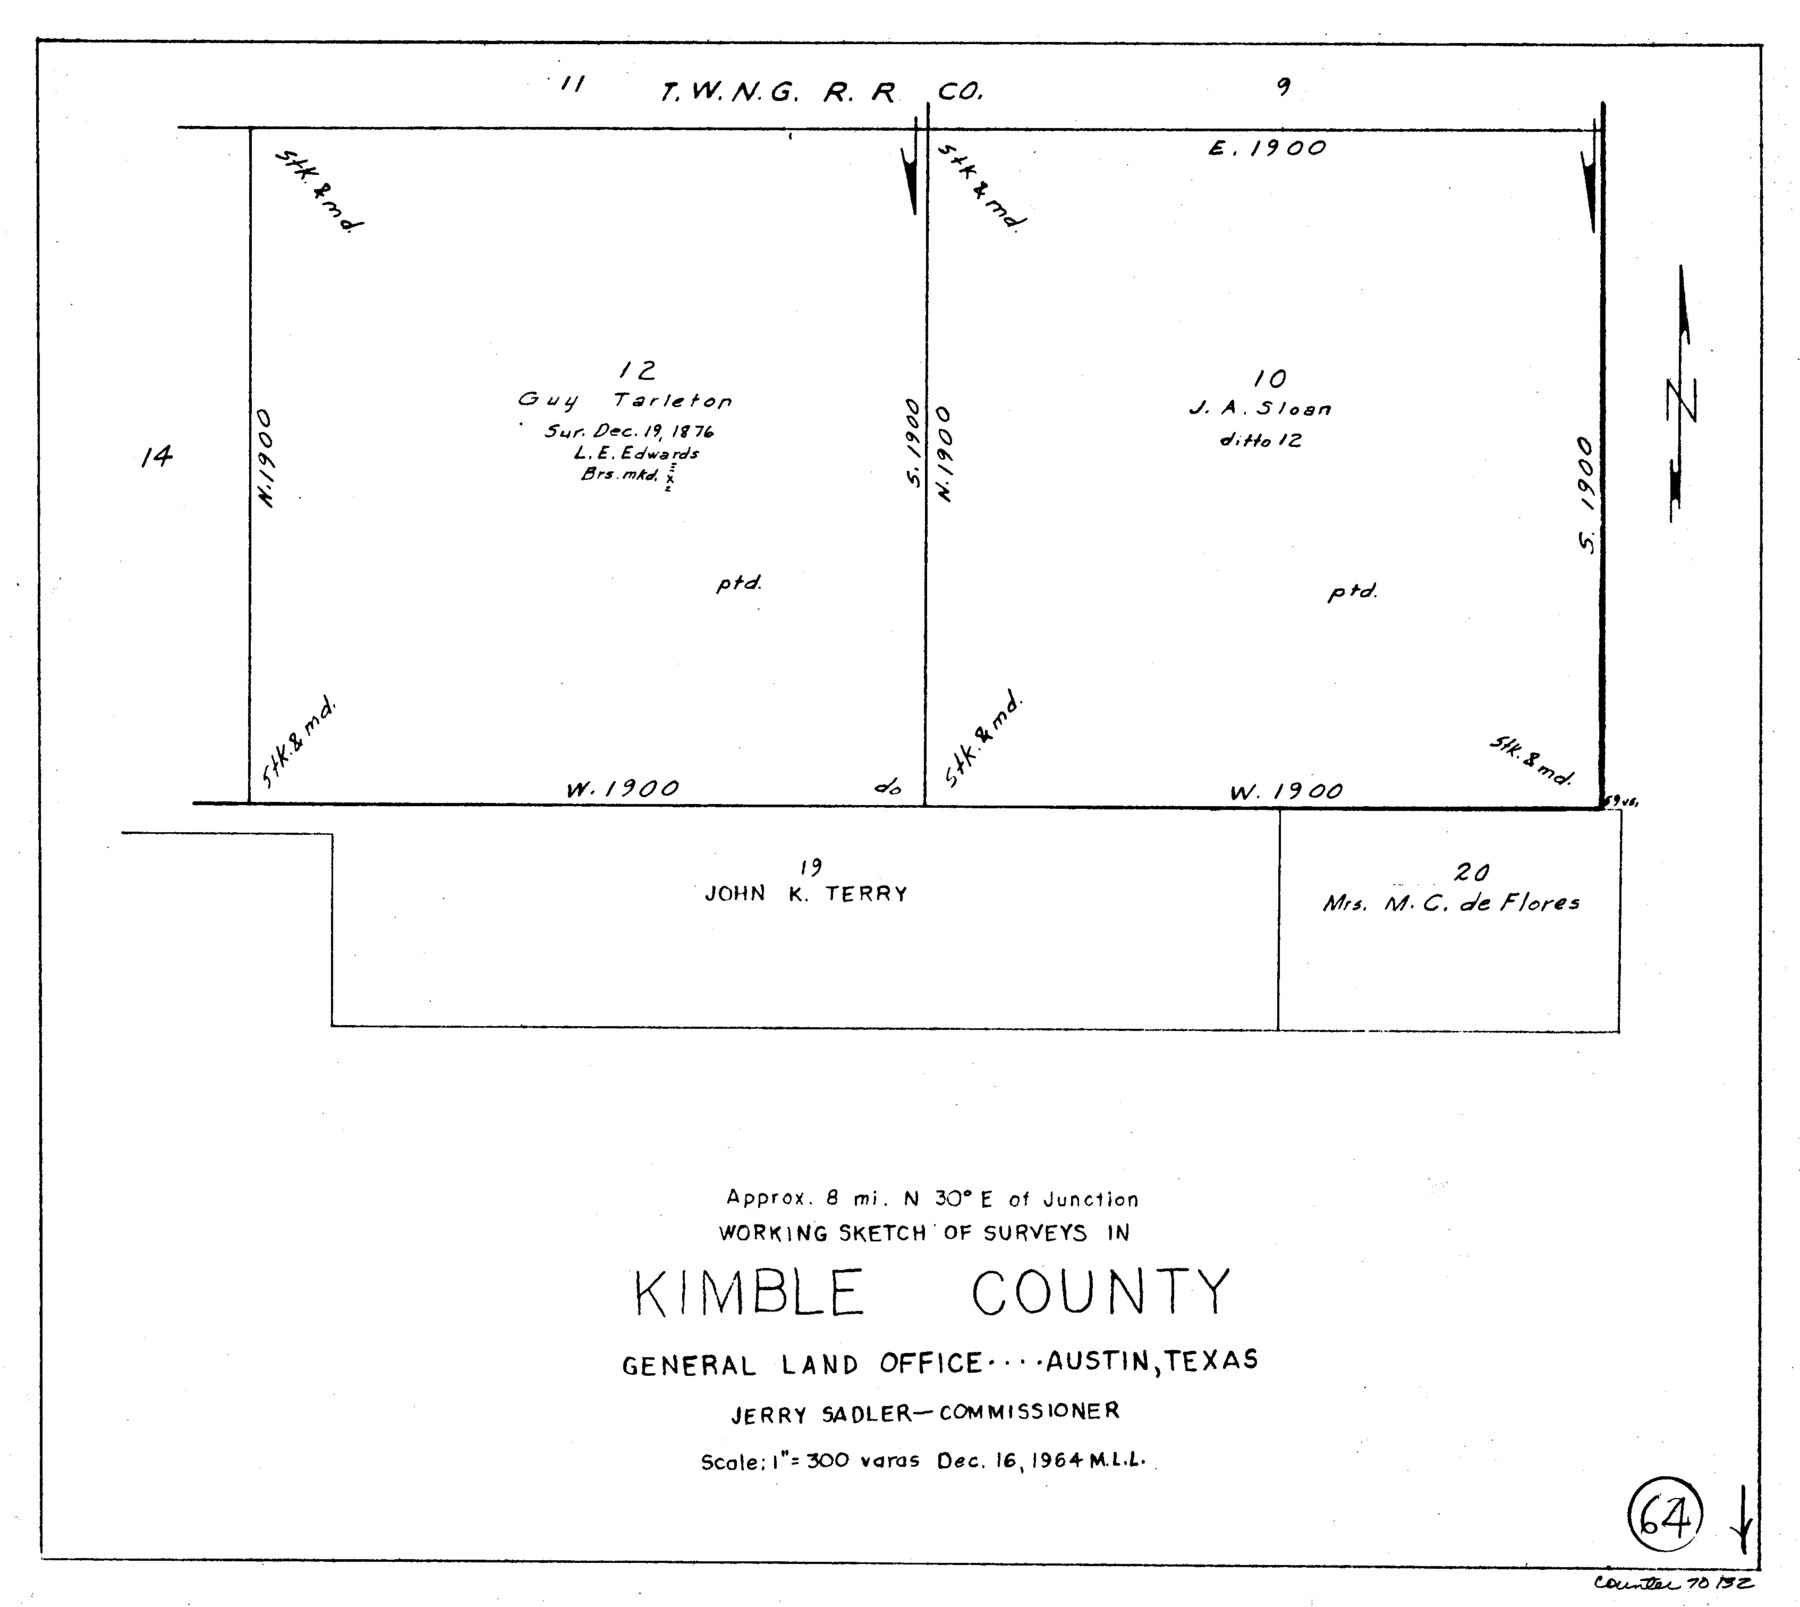 70132, Kimble County Working Sketch 64, General Map Collection